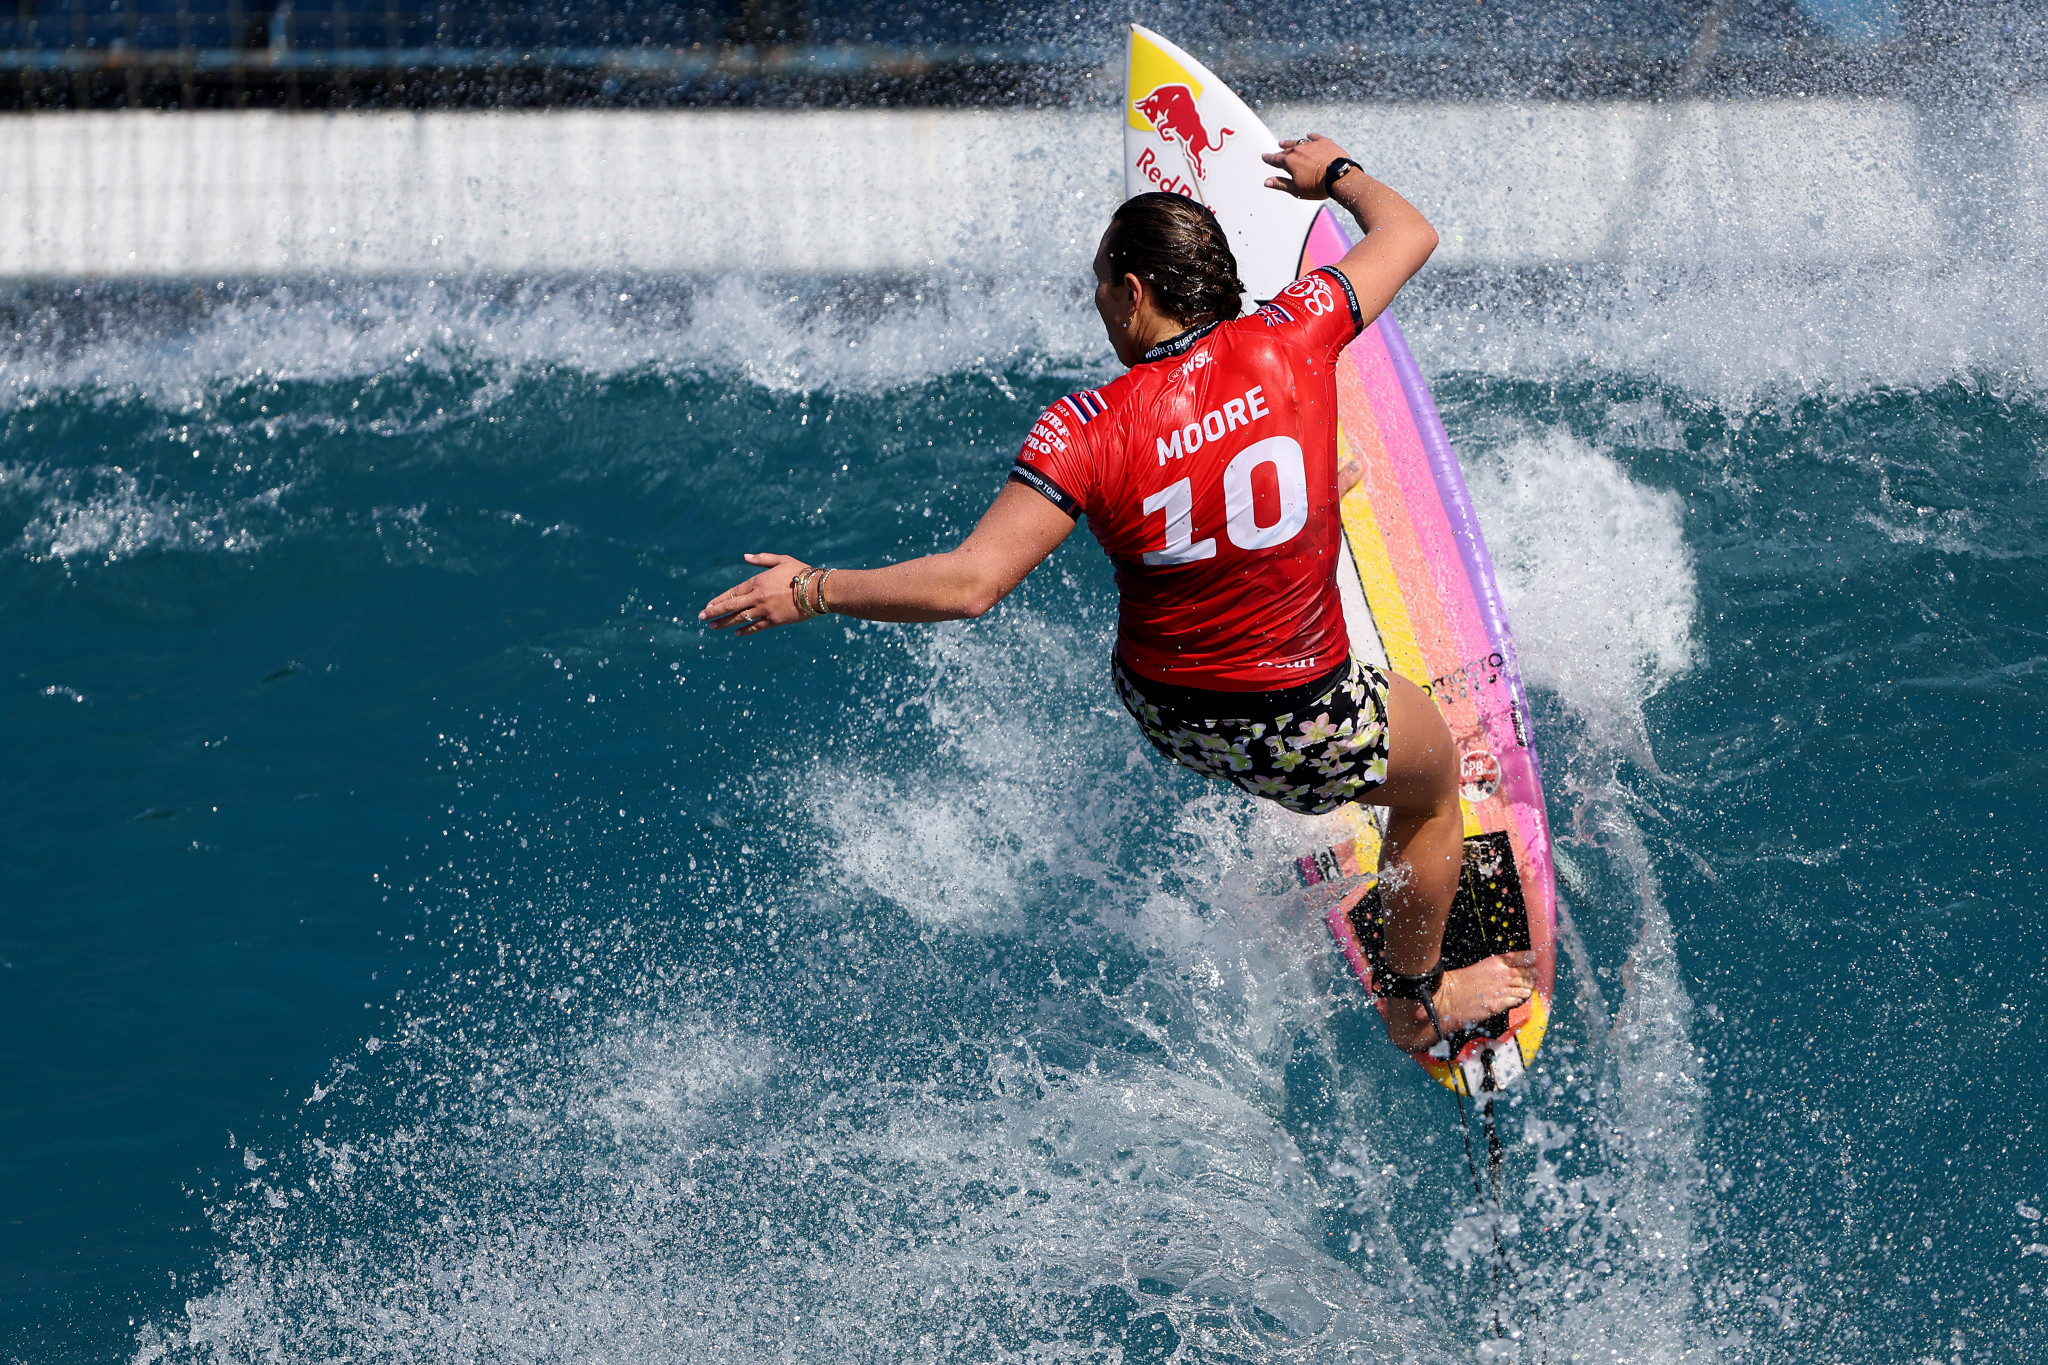 Olympic champion Moore starts strongly at World Surfing Games